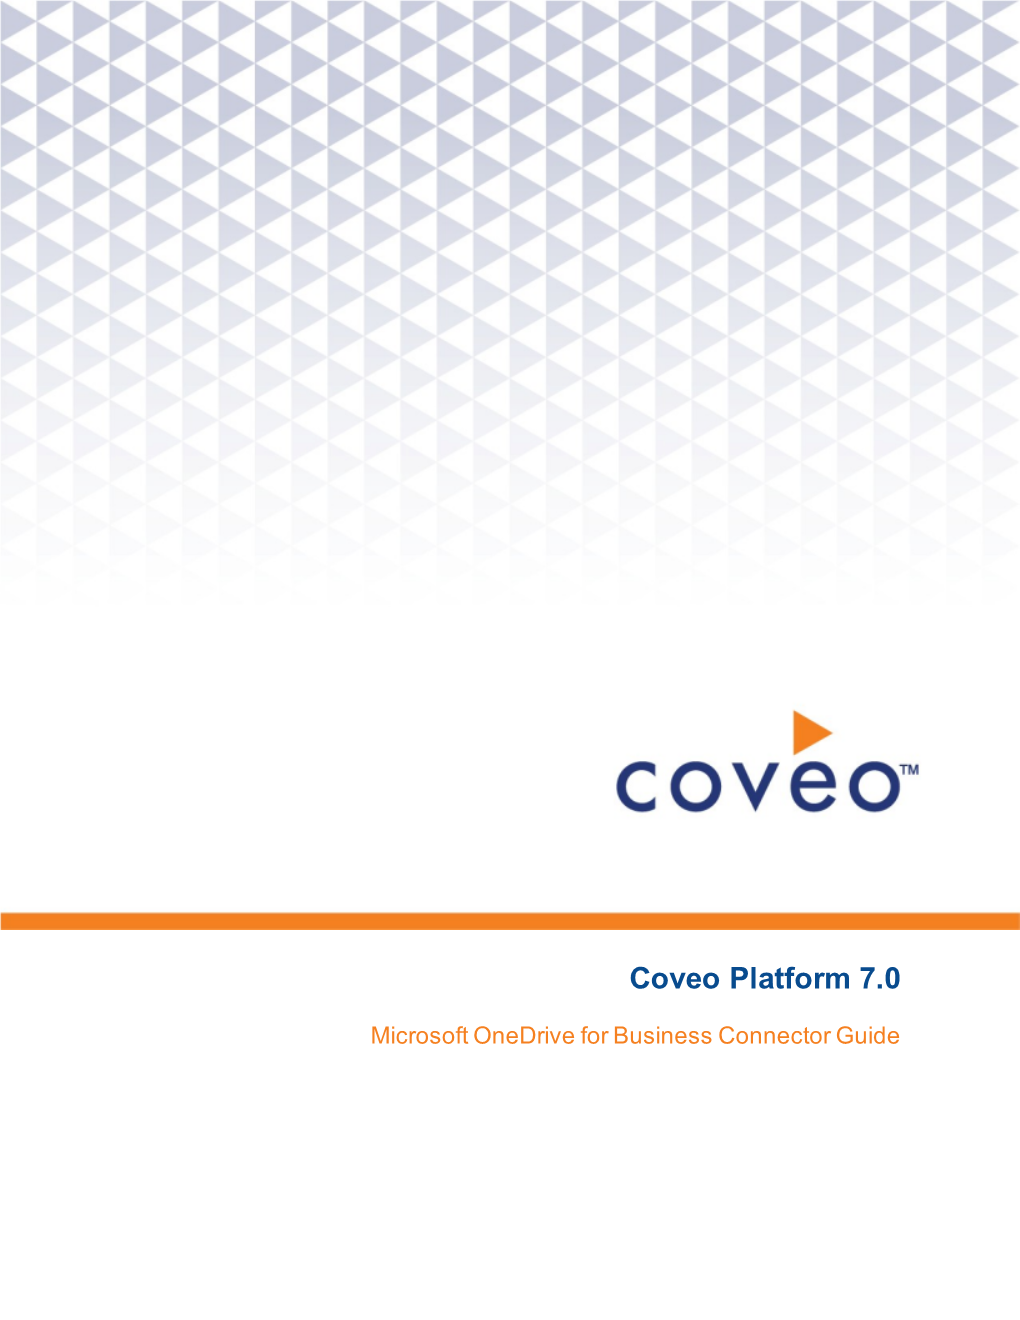 Microsoft Onedrive for Business Connector Guide Coveo Platform 7.0 | Microsoft Onedrive for Business Connector Guide